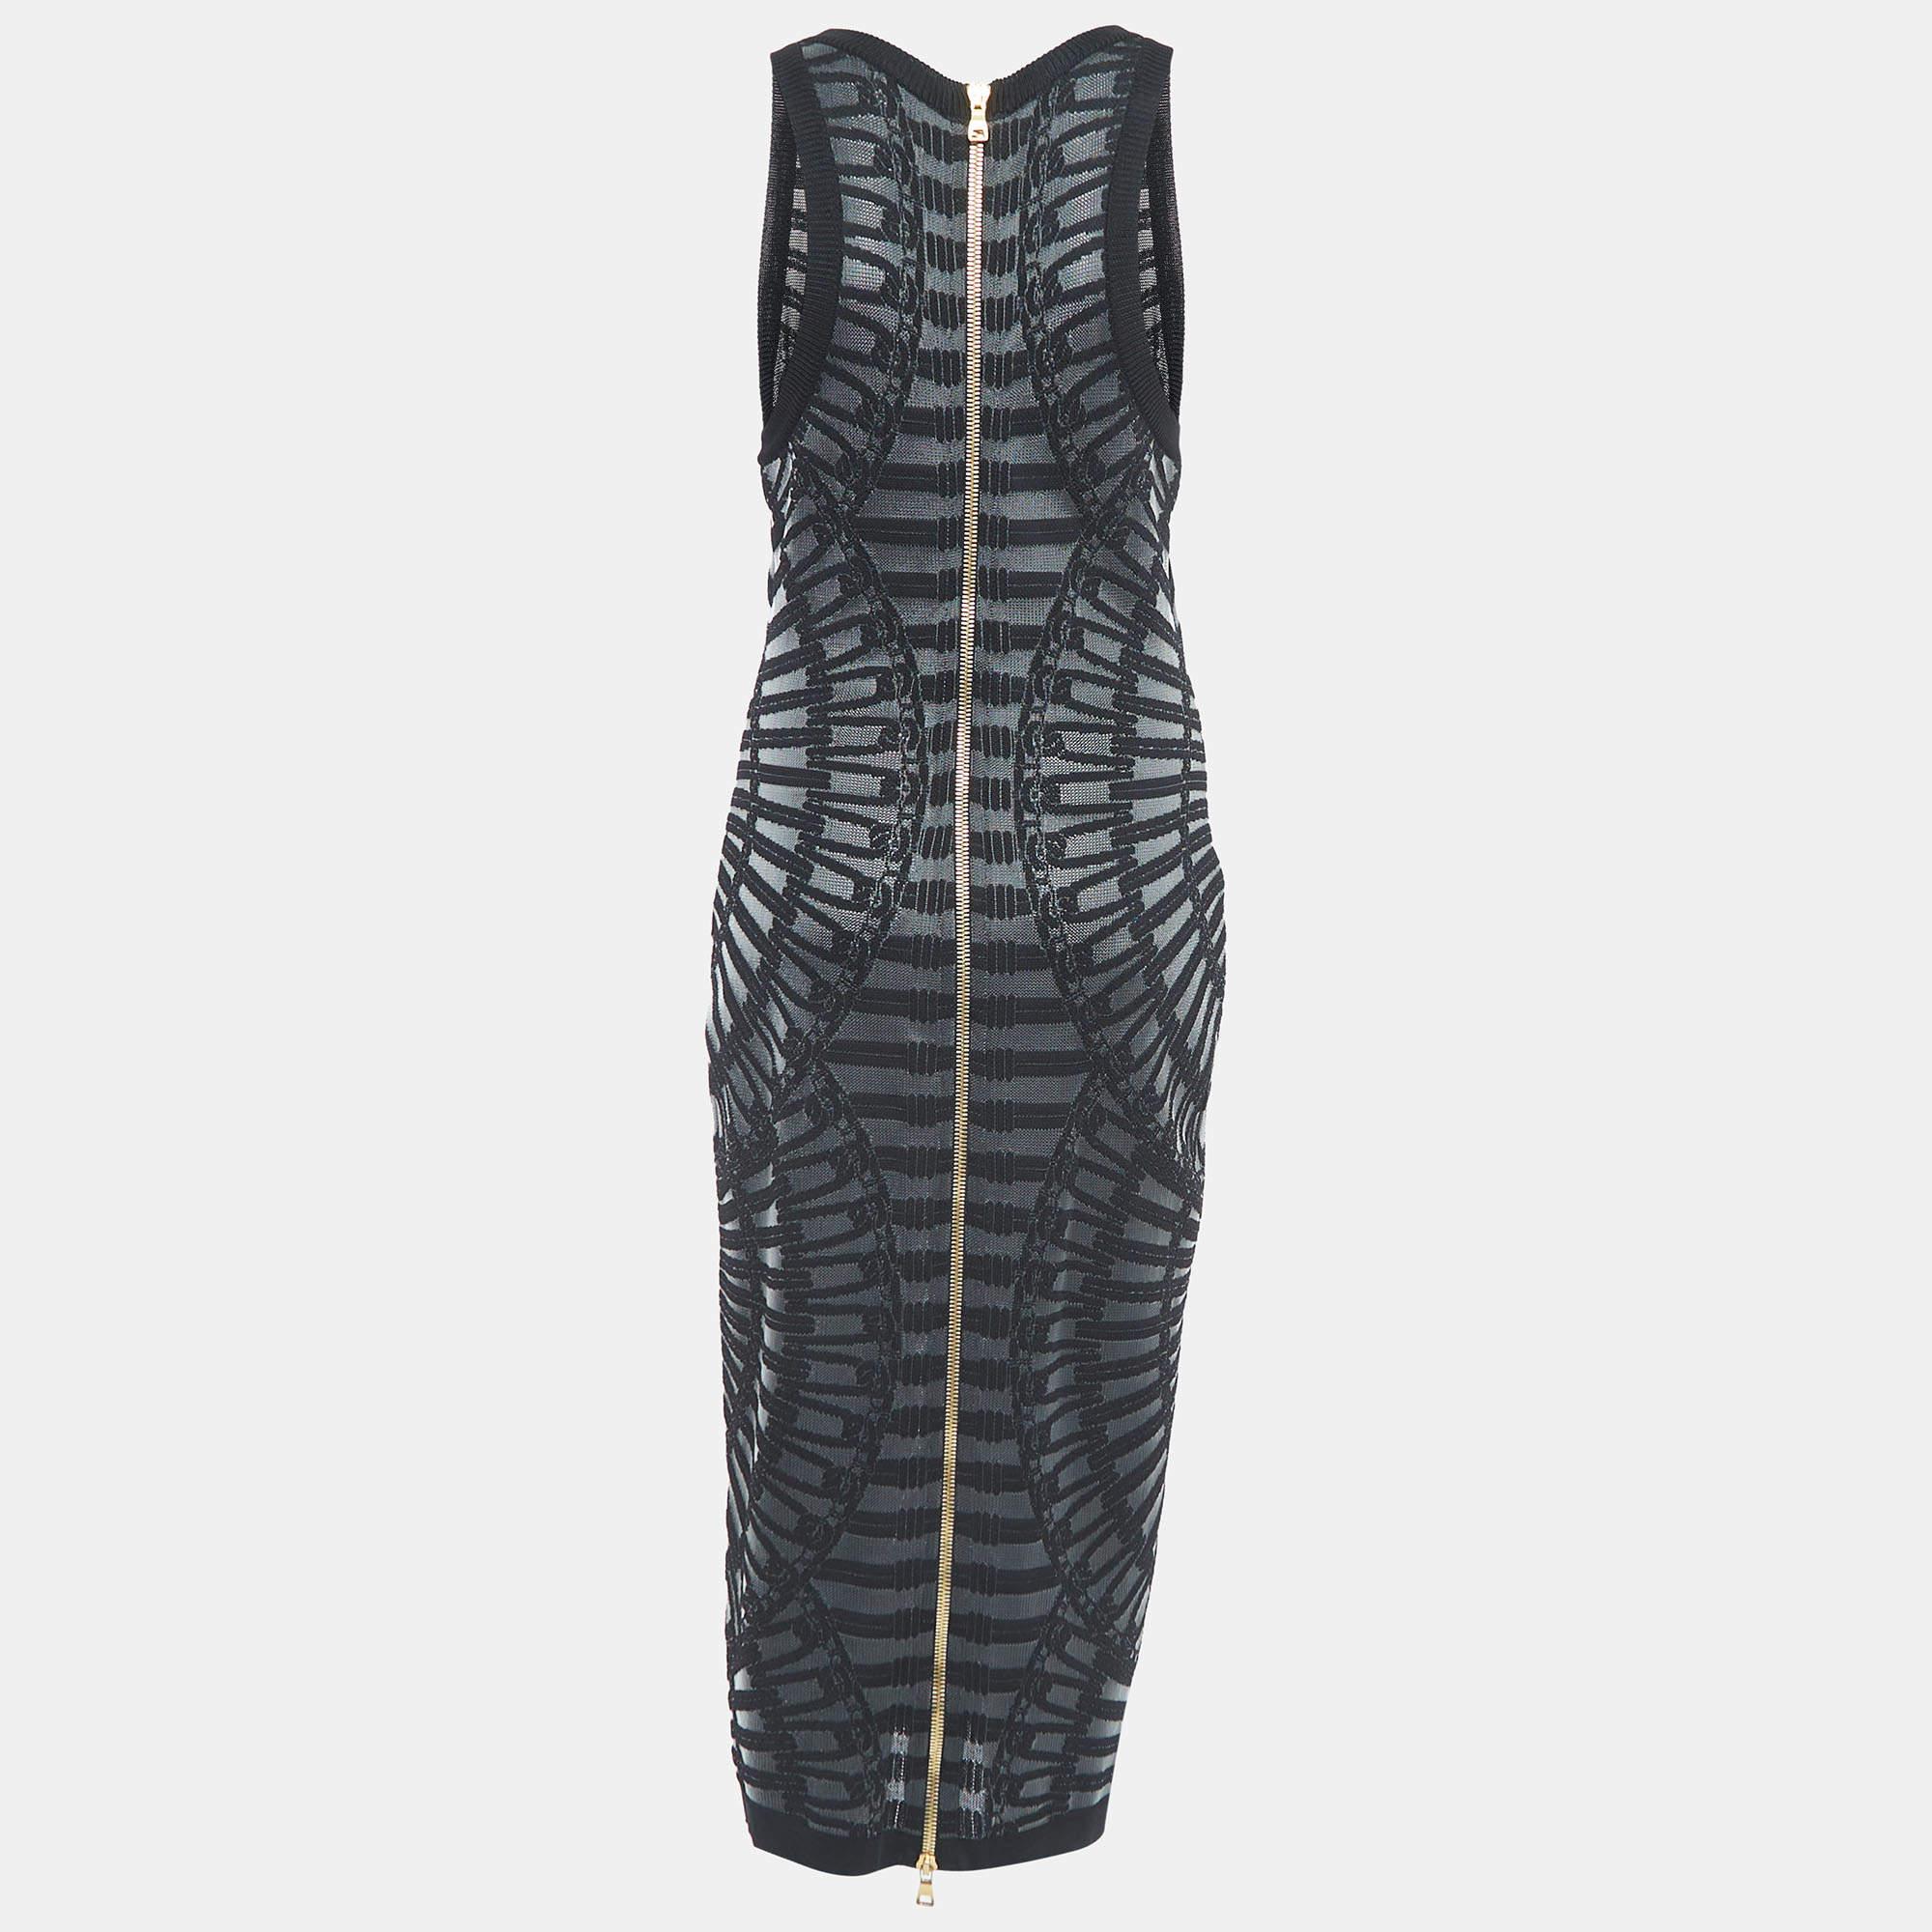 The fine artistry and the feminine silhouette of this bodycon dress exhibit the label's impeccable craftsmanship in tailoring. It is stitched using quality materials, has a good fit, and can be easily styled with chic accessories, open-toe sandals,